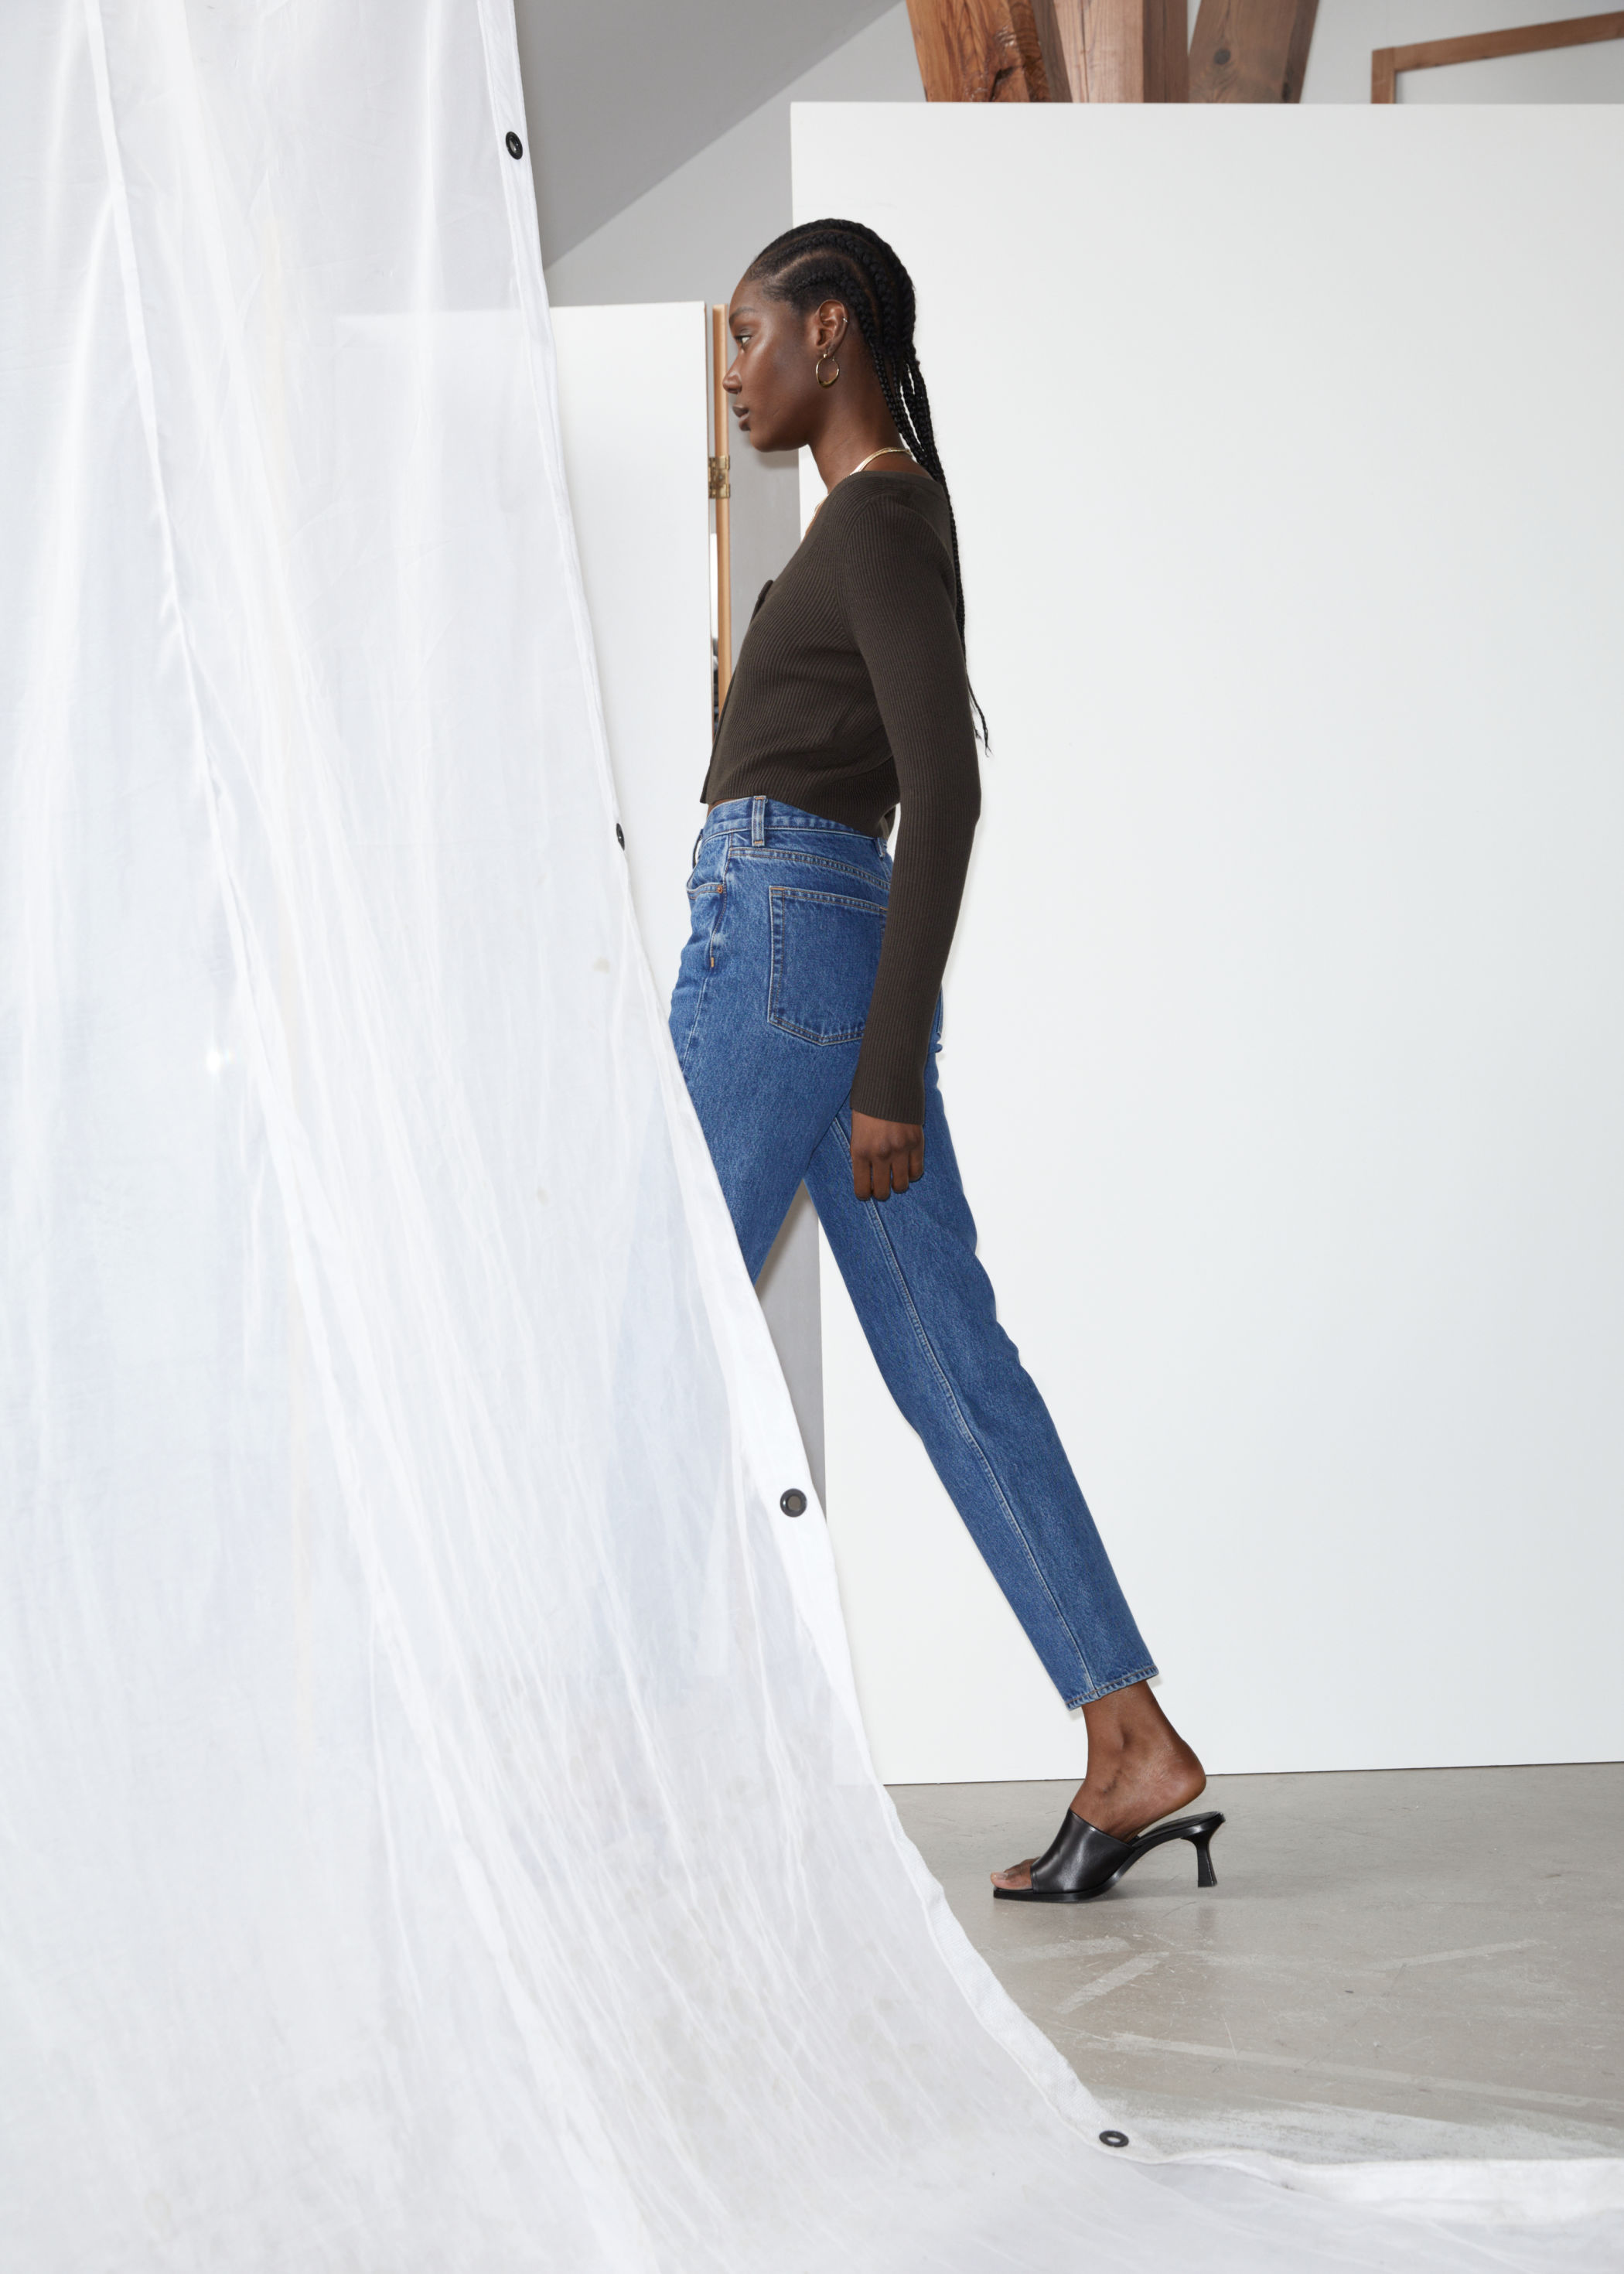 & Other Stories' Keeper Jeans Are the Perfect Straight Leg | Who What ...